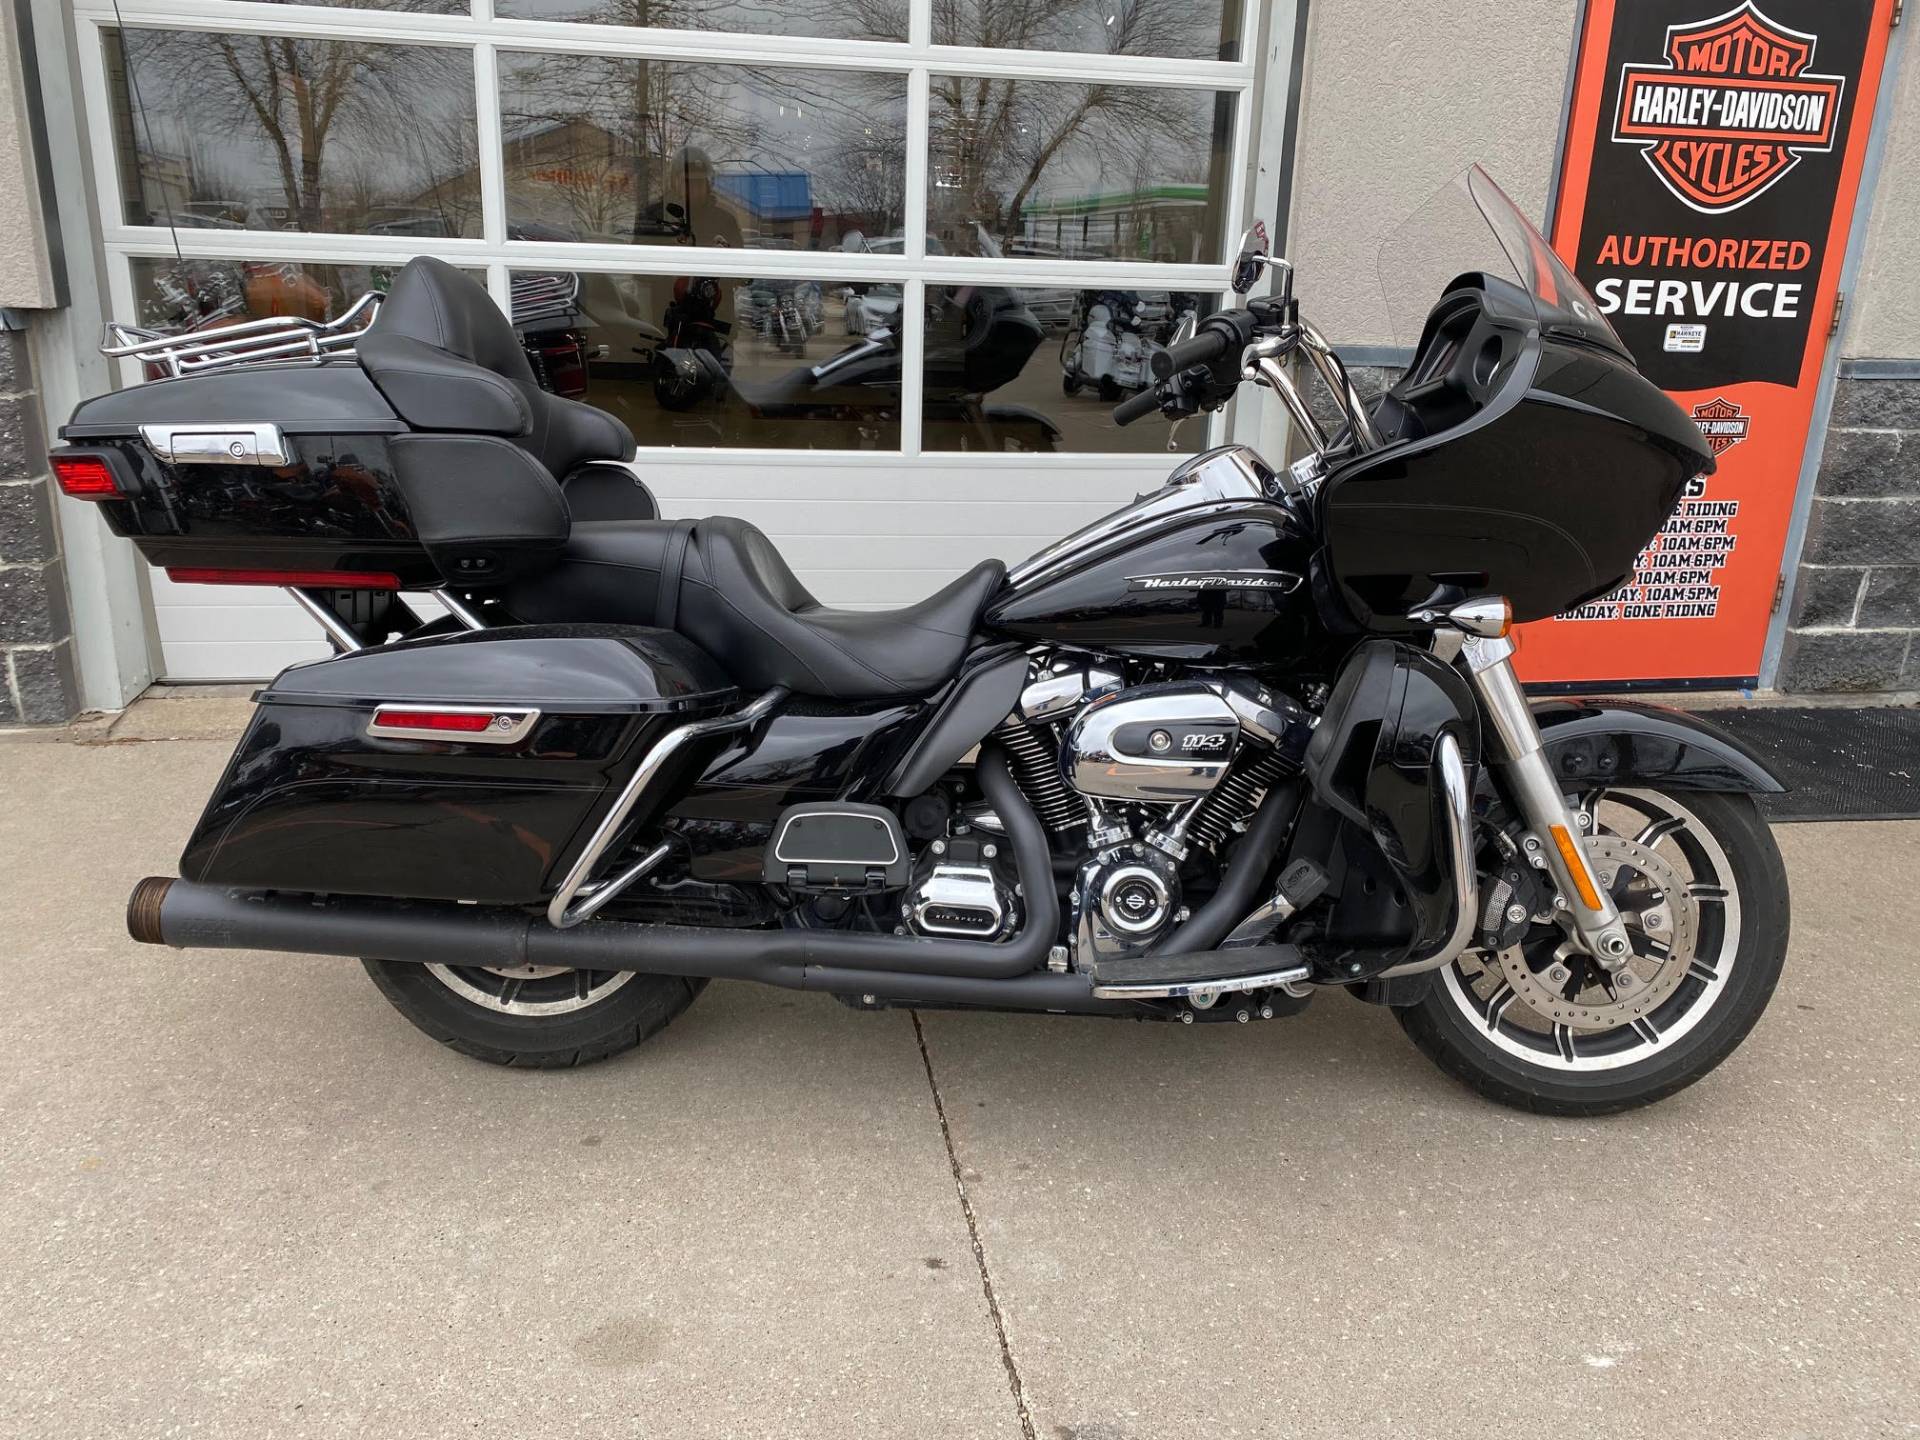 Used 2019 Harley Davidson Road Glide Ultra Vivid Black Motorcycles In Davenport Ia M655636a